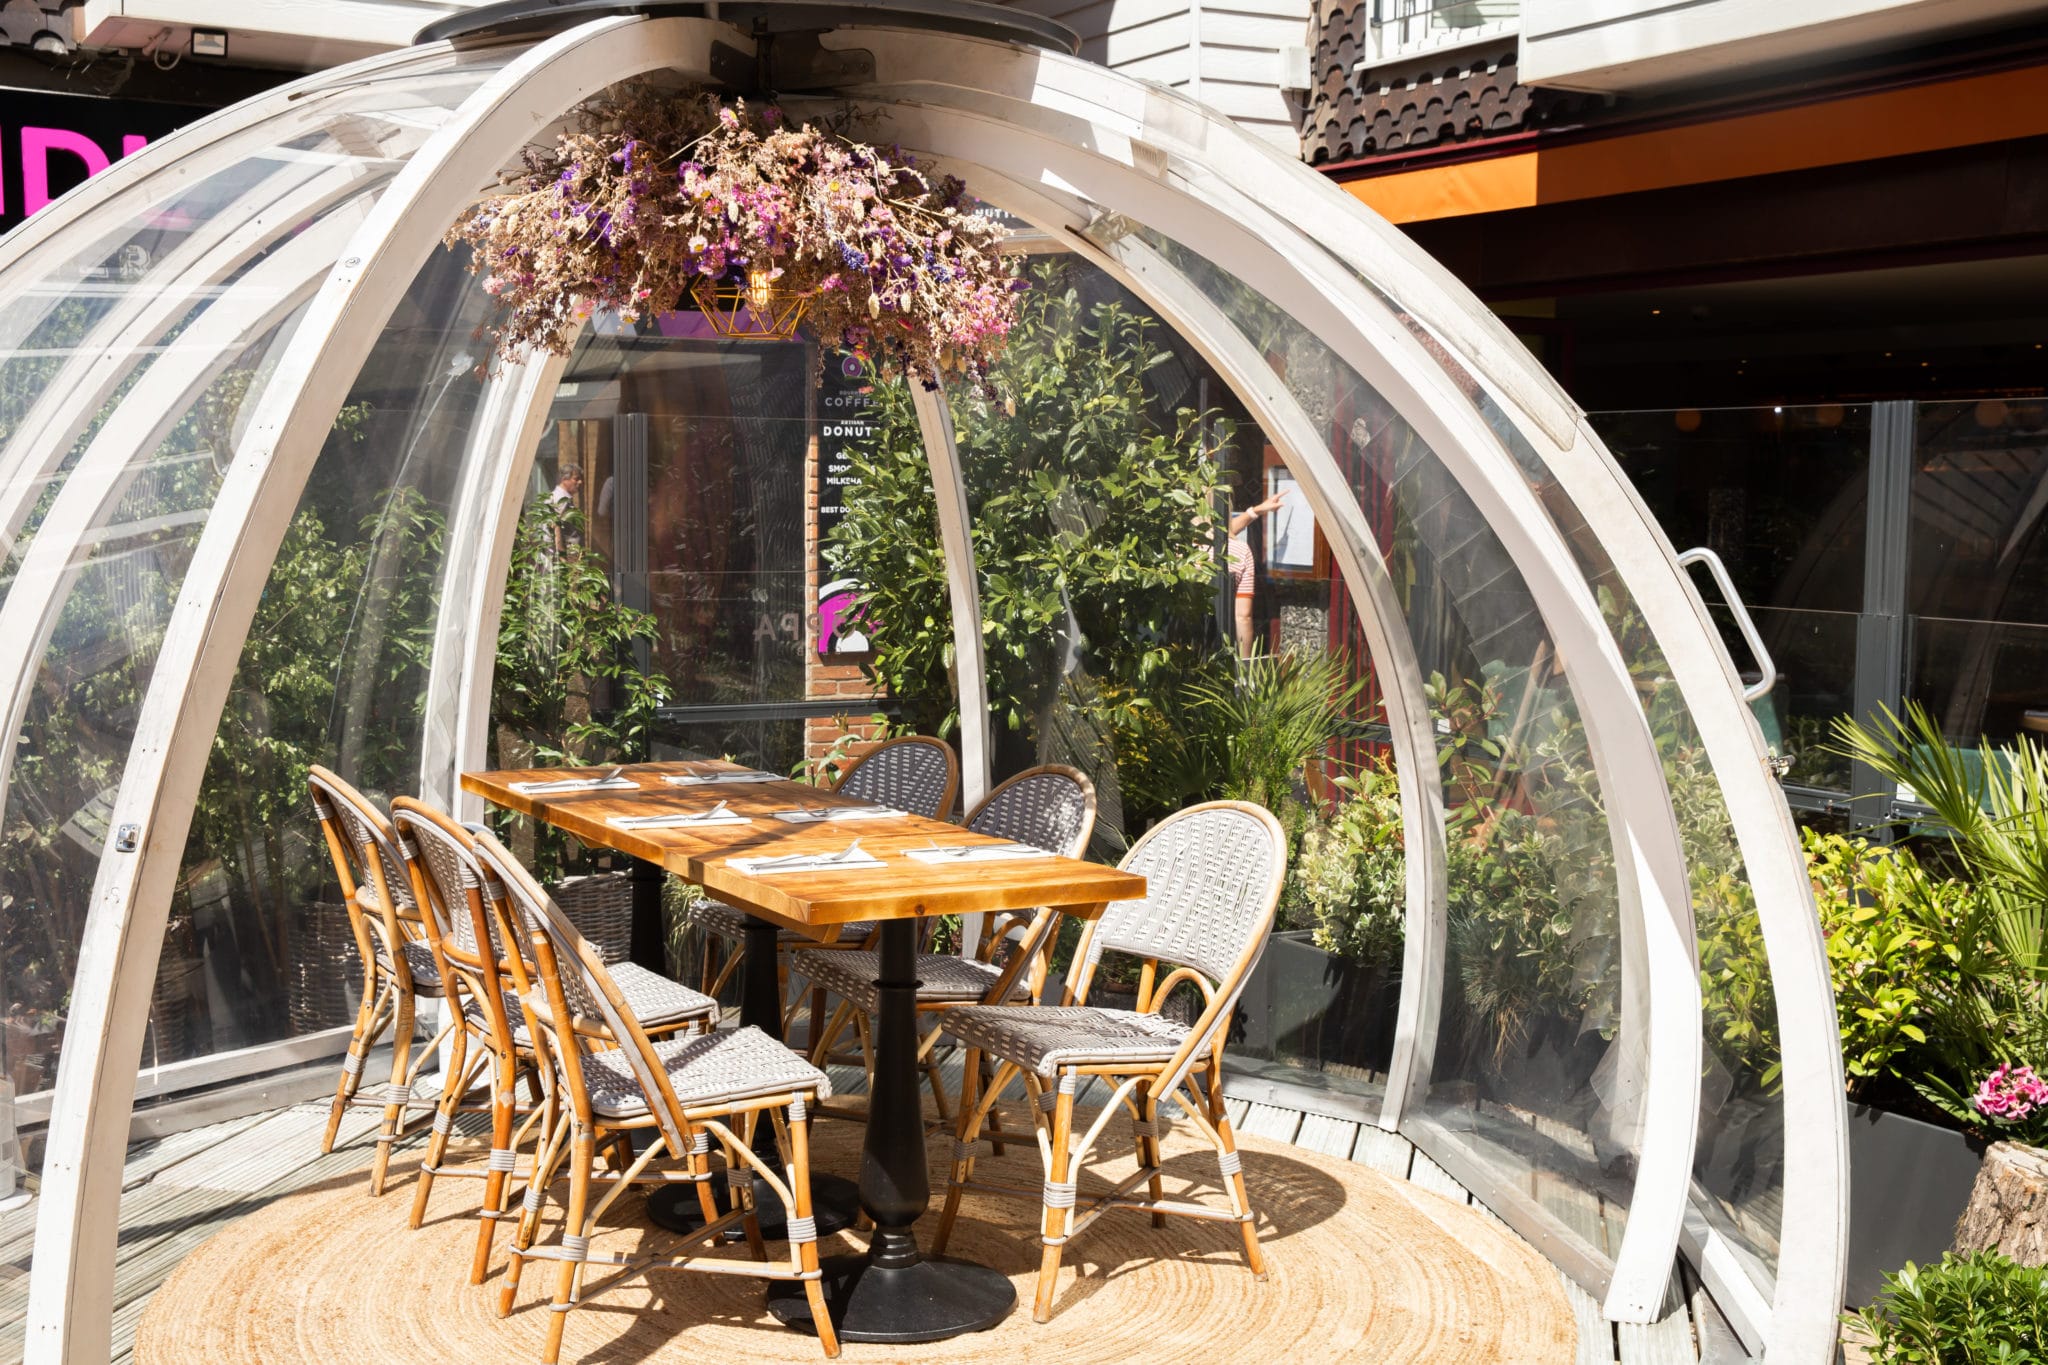 Alfresco dining in a globe style pod with a wooden table and chairs inside the pod on a sunny day. Leisurely lunch ides in Brighton